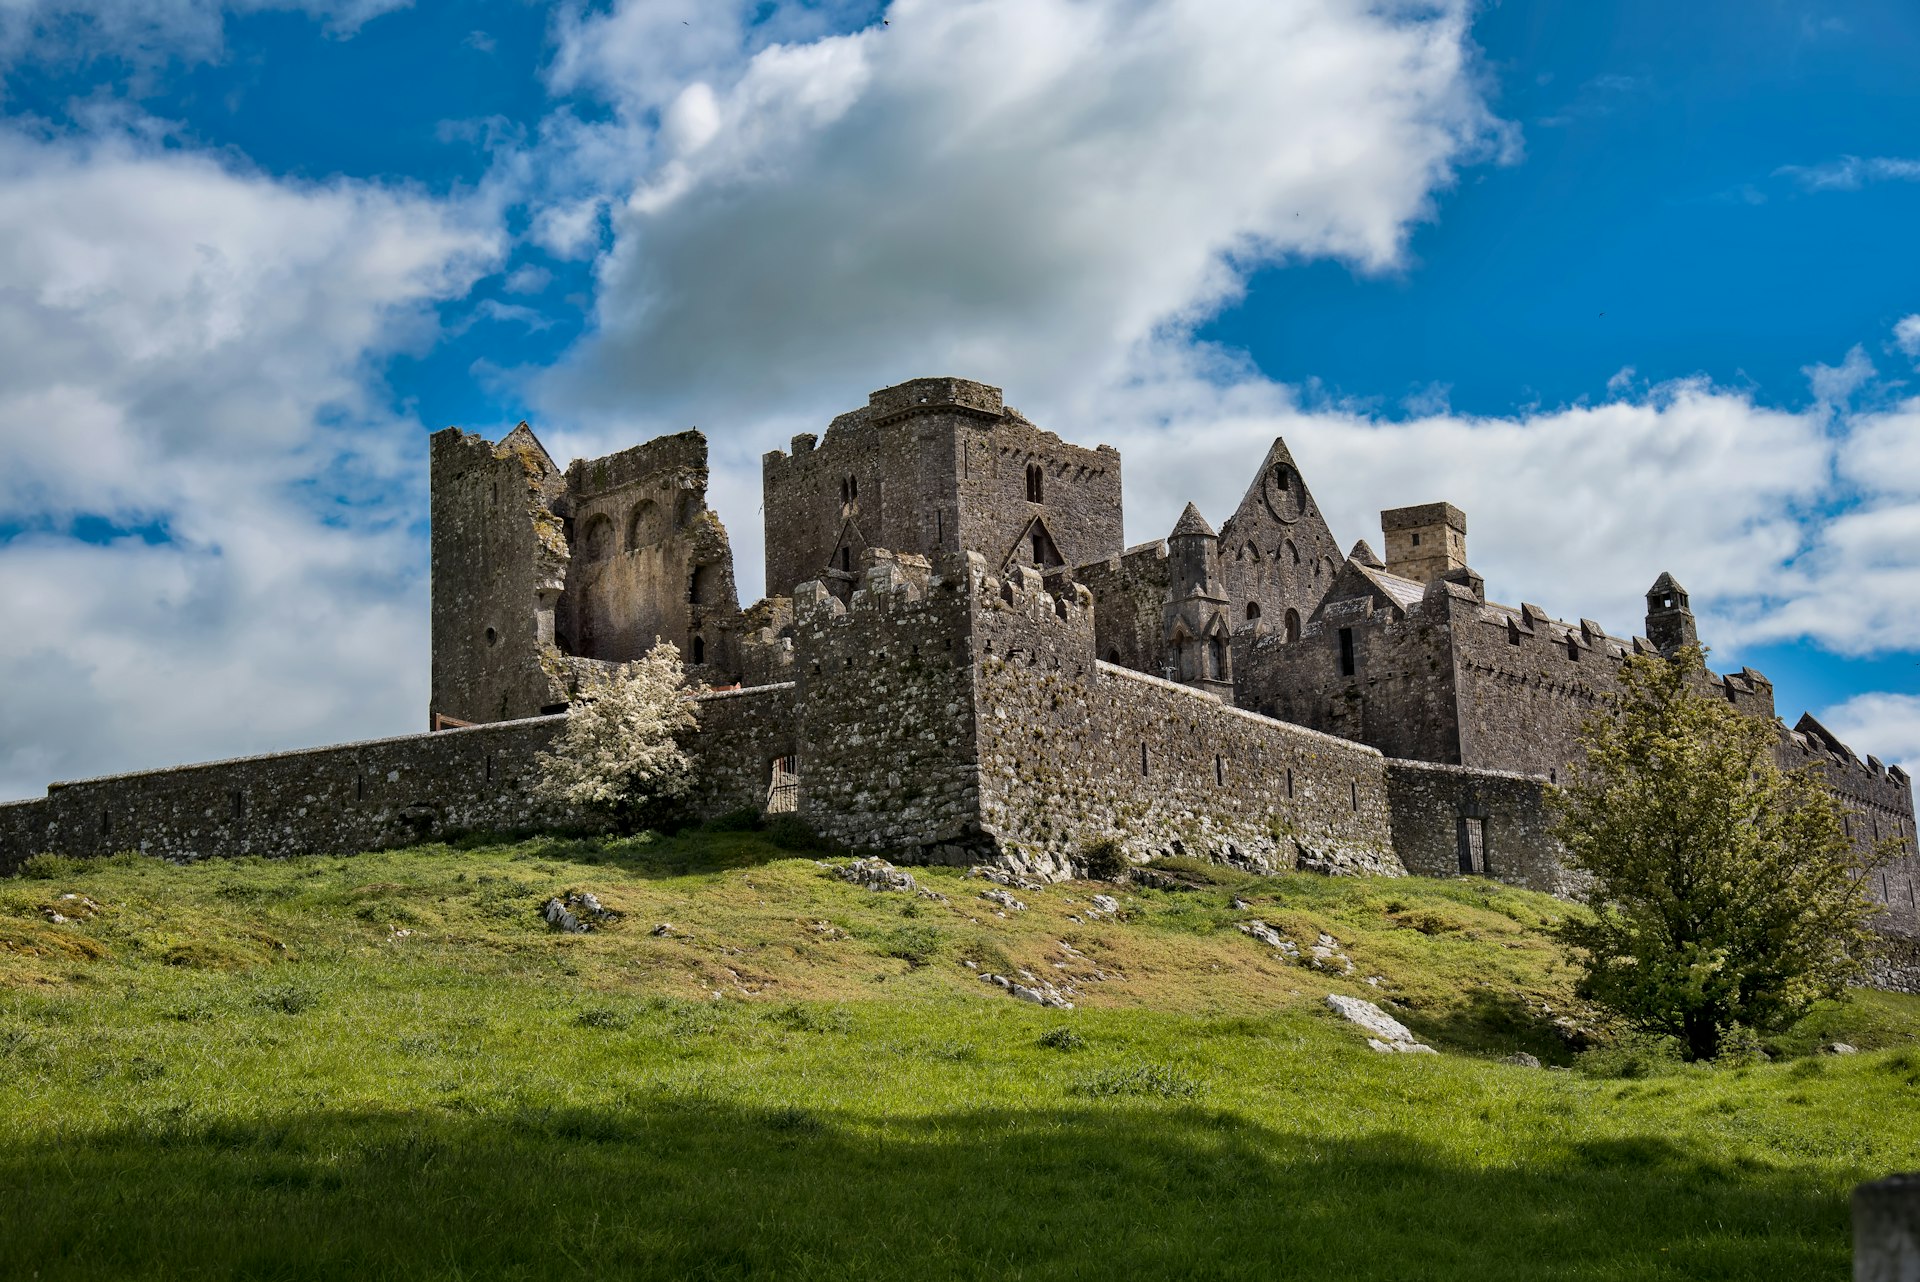 The Rock of Cashel, a historical site located in Cashel